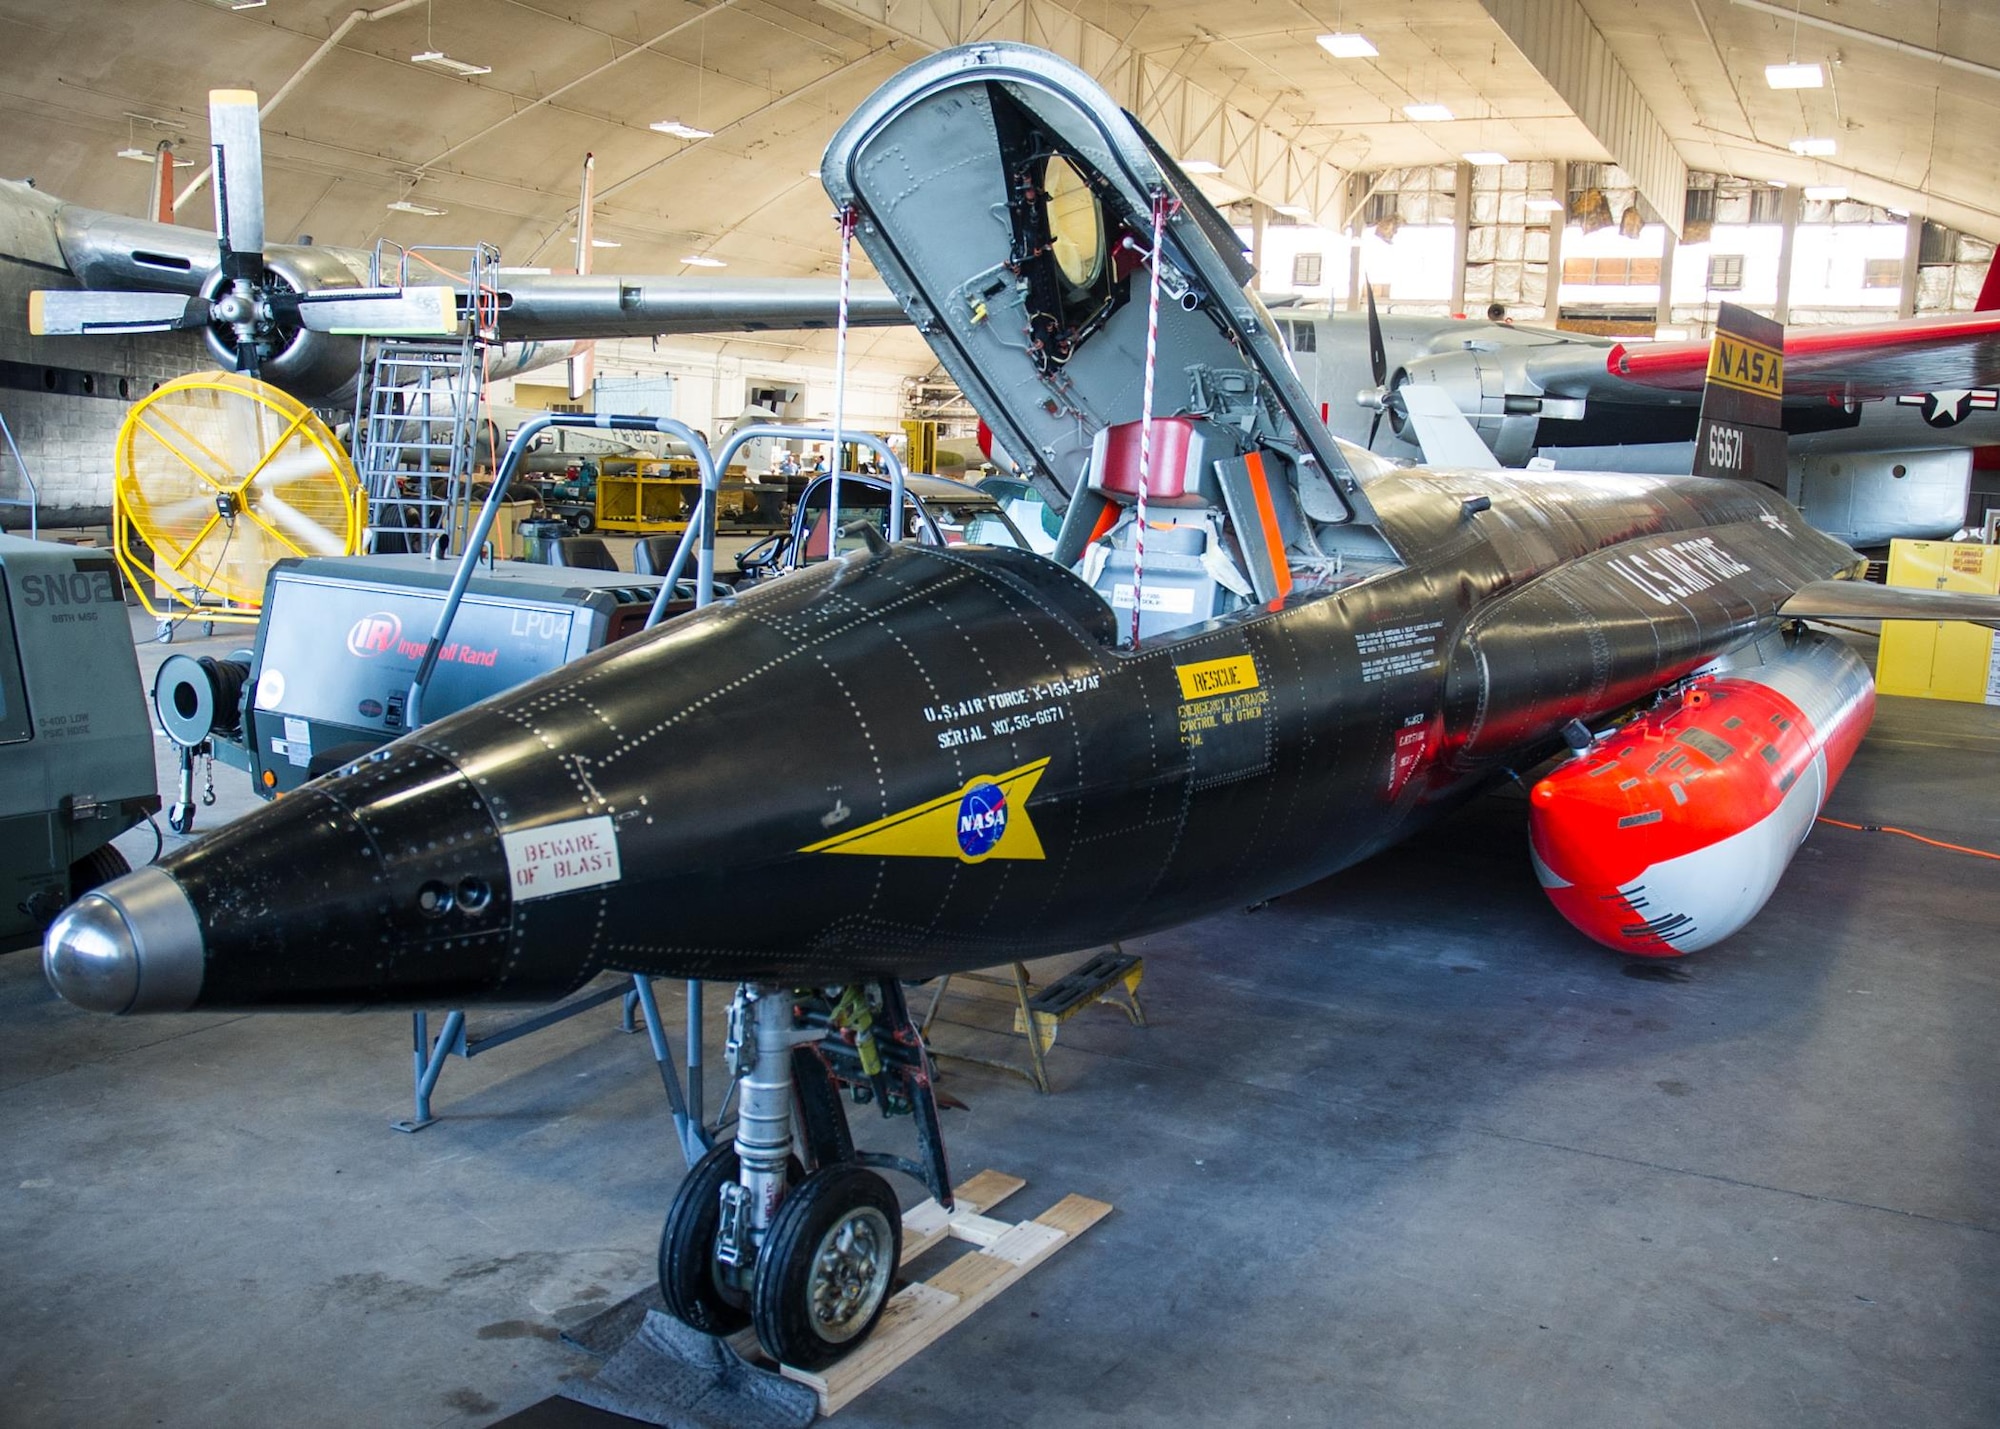 DAYTON, Ohio -- North American X-15A-2 in the restoration hangar at the National Museum of the United States Air Force. (U.S. Air Force photo)